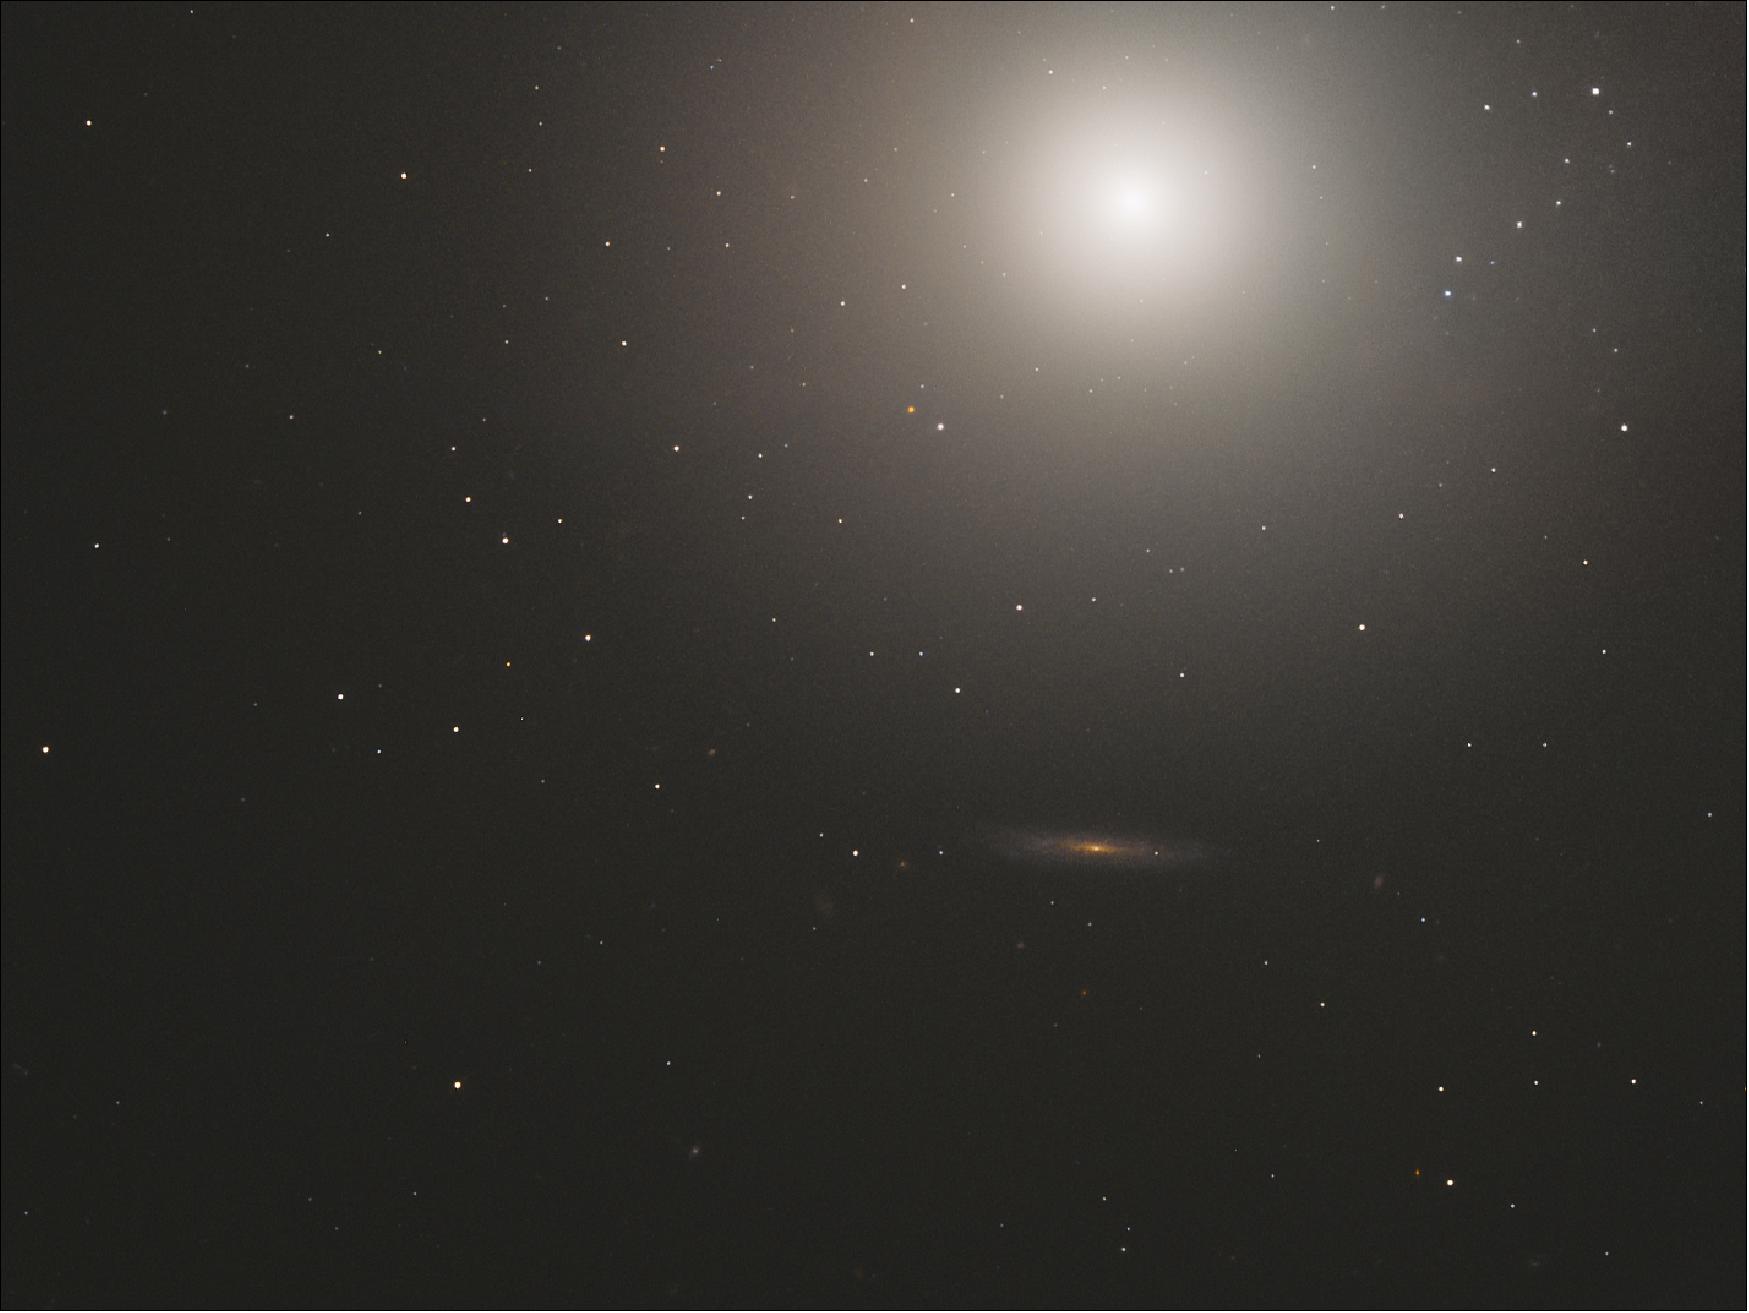 Figure 79: This huge ball of stars — around 100 billion in total — is an elliptical galaxy located some 55 million light-years away from us. Known as Messier 89, this galaxy appears to be perfectly spherical; this is unusual for elliptical galaxies, which tend to be elongated ellipsoids. The apparently spherical nature of Messier 89 could, however, be a trick of perspective, and be caused by its orientation relative to the Earth (image credit: ESA/Hubble & NASA, S. Faber, et al.)